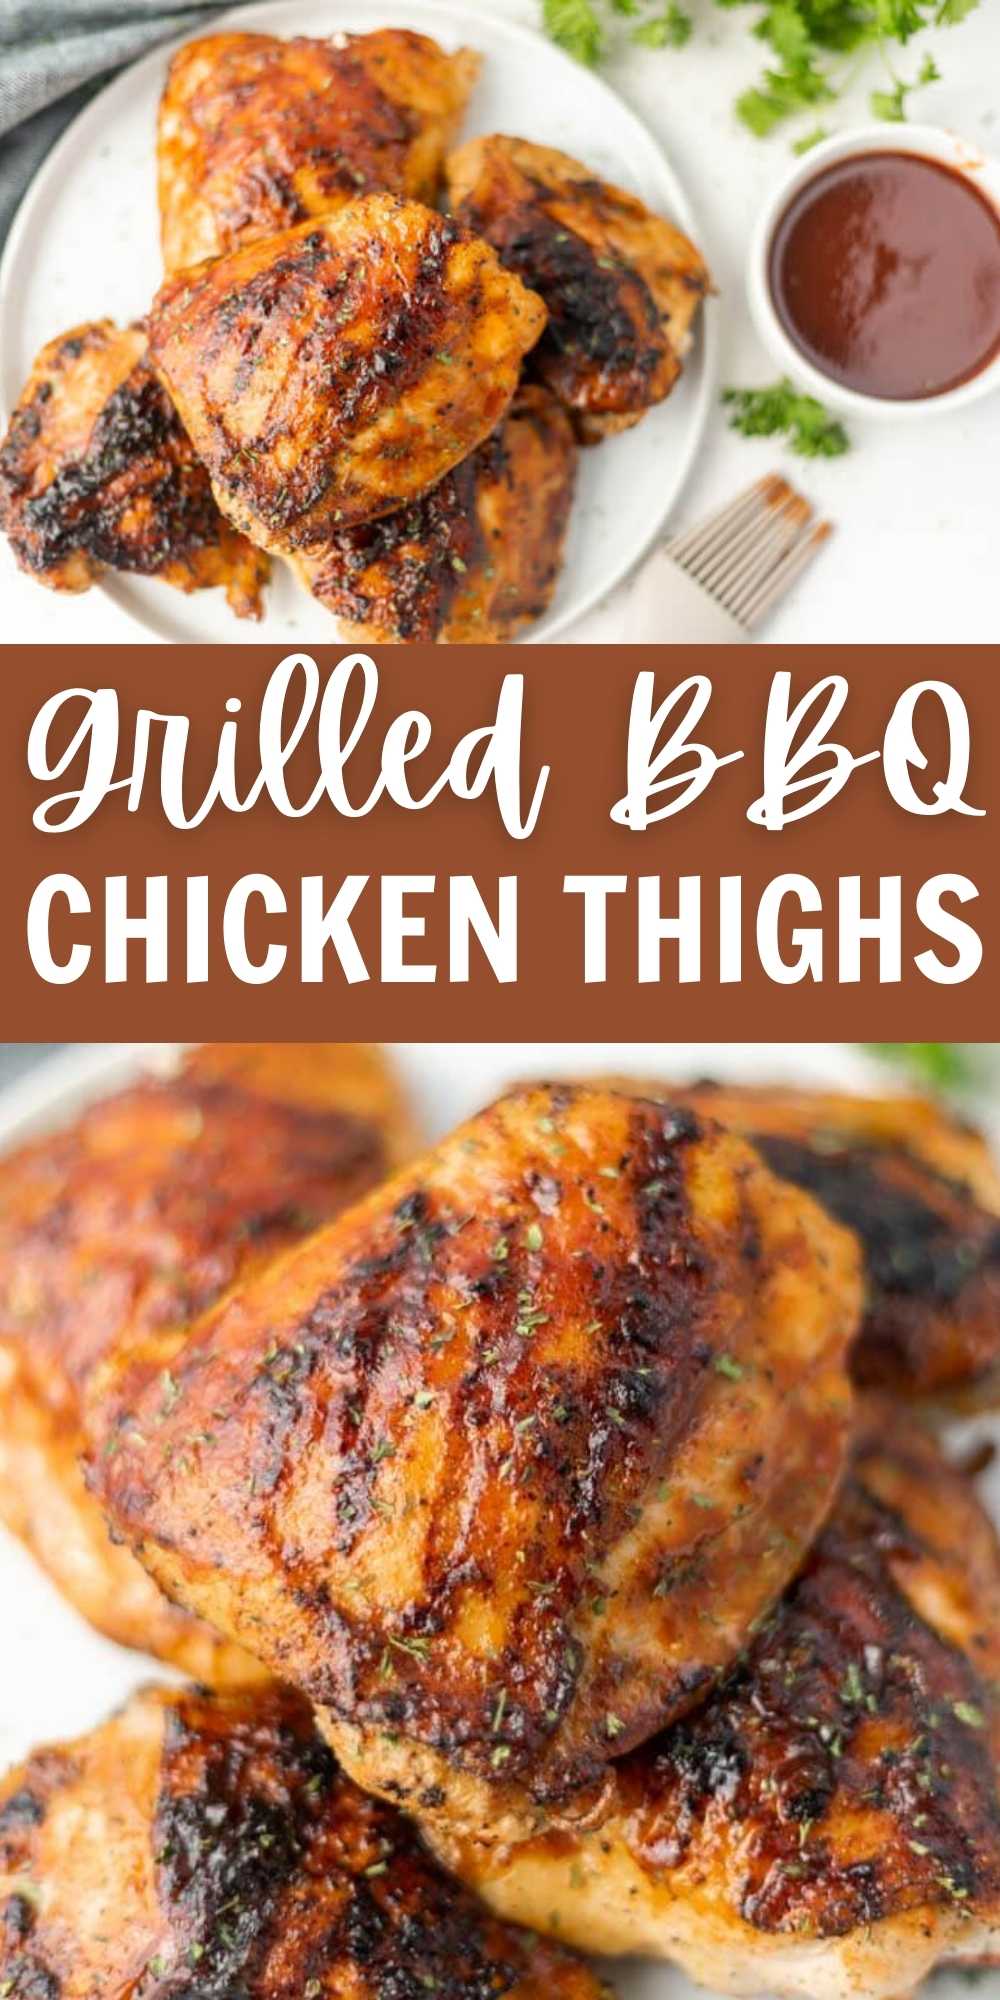 Grilled BBQ chicken thighs recipe is tender and loaded with flavor. From the BBQ sauce to the smoky flavor, this recipe does not disappoint. Learn how to grill bone in chicken thighs that are easy and perfect every time. #eatingonadime #grillingrecipes #chickenrecipes #BBQrecipes 
